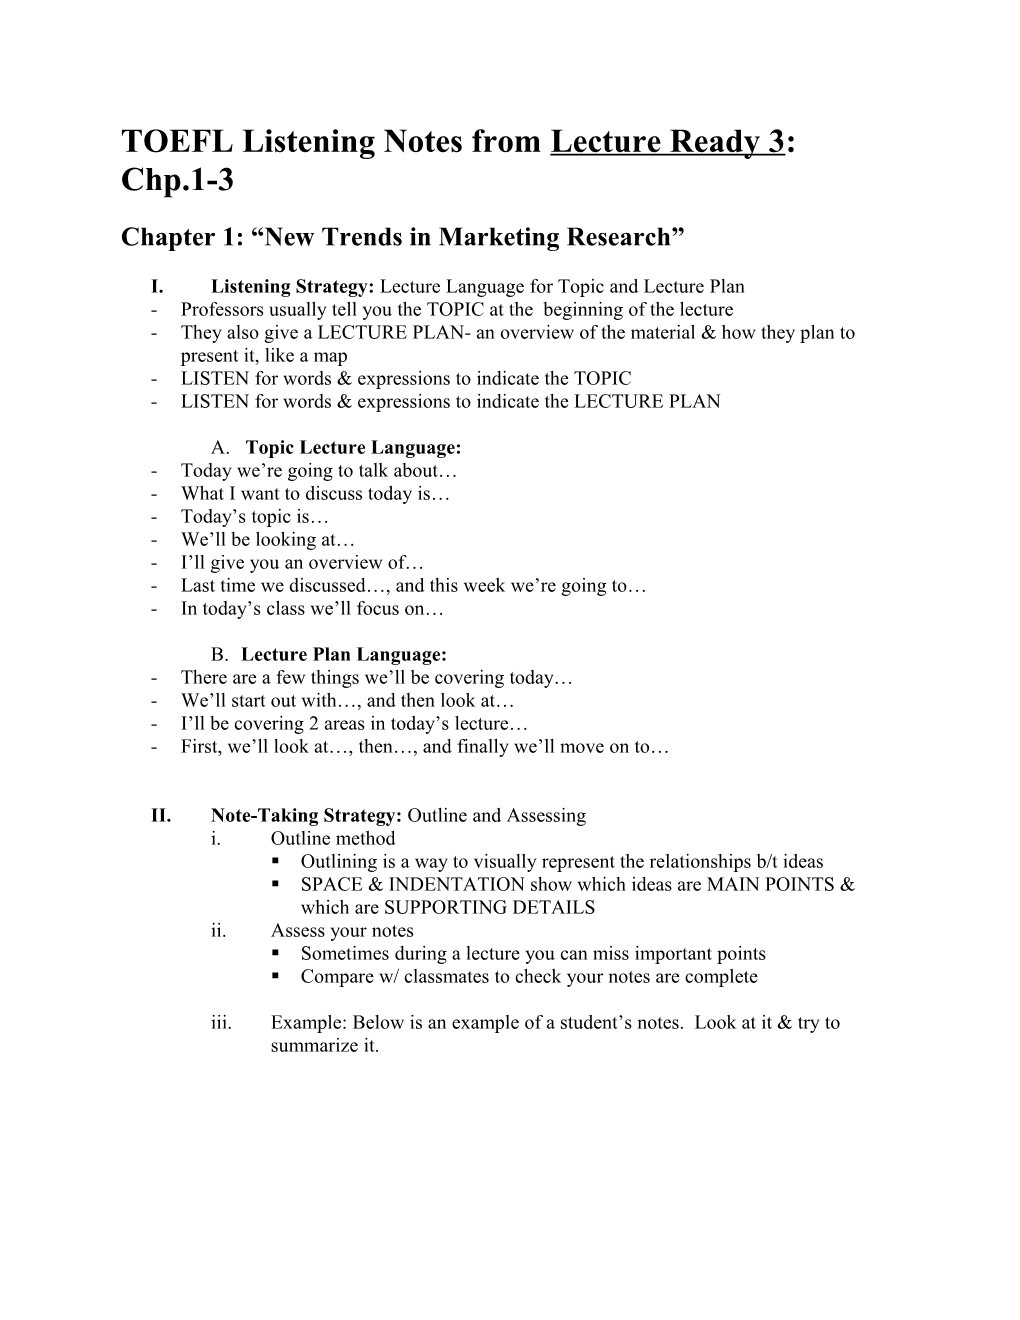 TOEFL Listening Notes from Lecture Ready 3: Chp.1-3